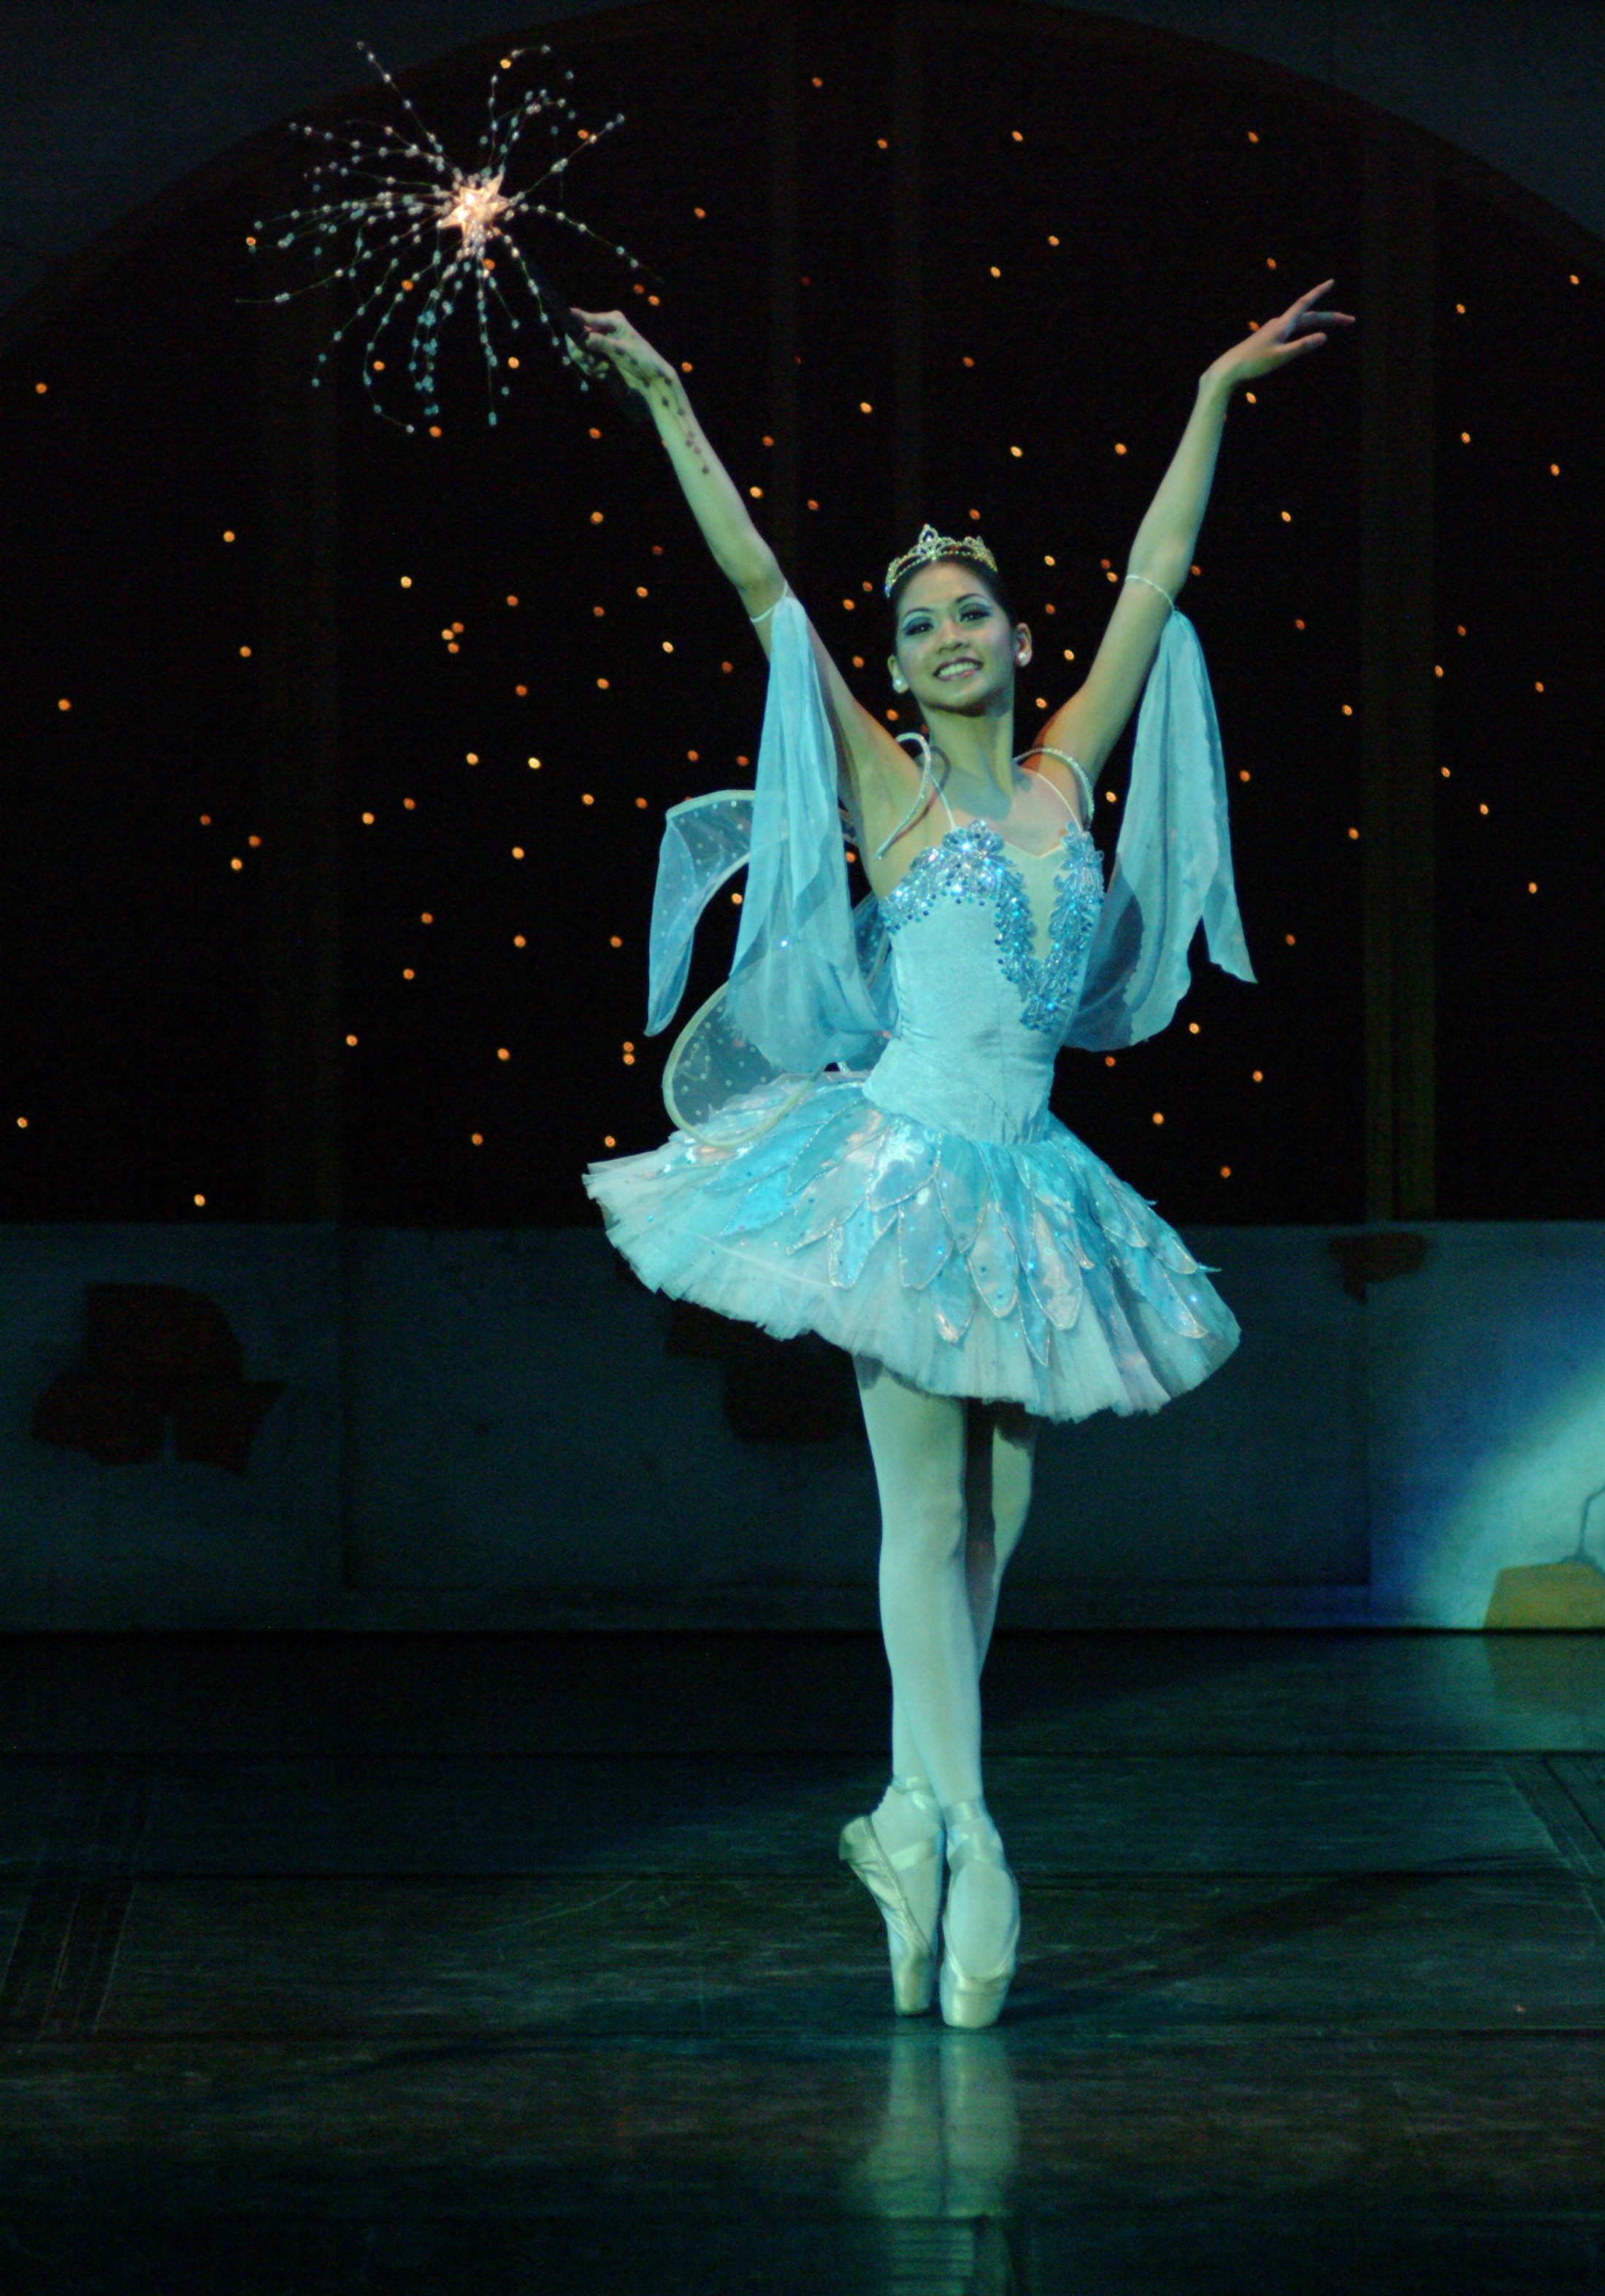    The Blue Fairy (Christine Rocas) adds a touch of enchantment to  Pinocchio , adapted into ballet by Osias Barroso (2004). Wearing a blue tutu and holding her magic wand, she symbolizes love and kindness as she reminds the puppet Pinocchio to alway